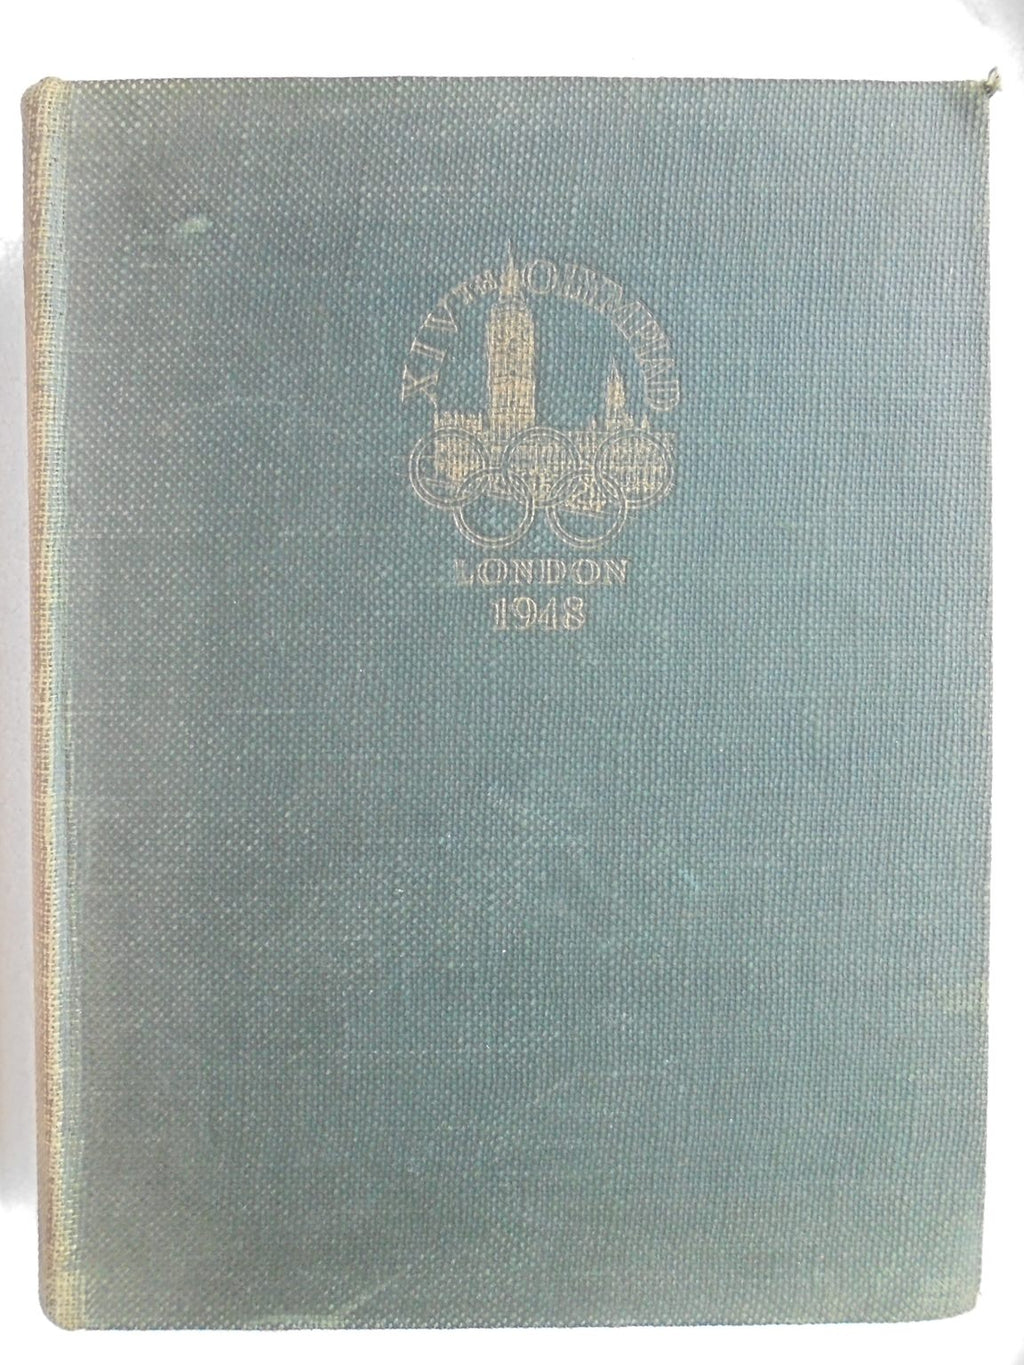 1948 London. XIV Olympiad. The Official Report of the Organising Committee